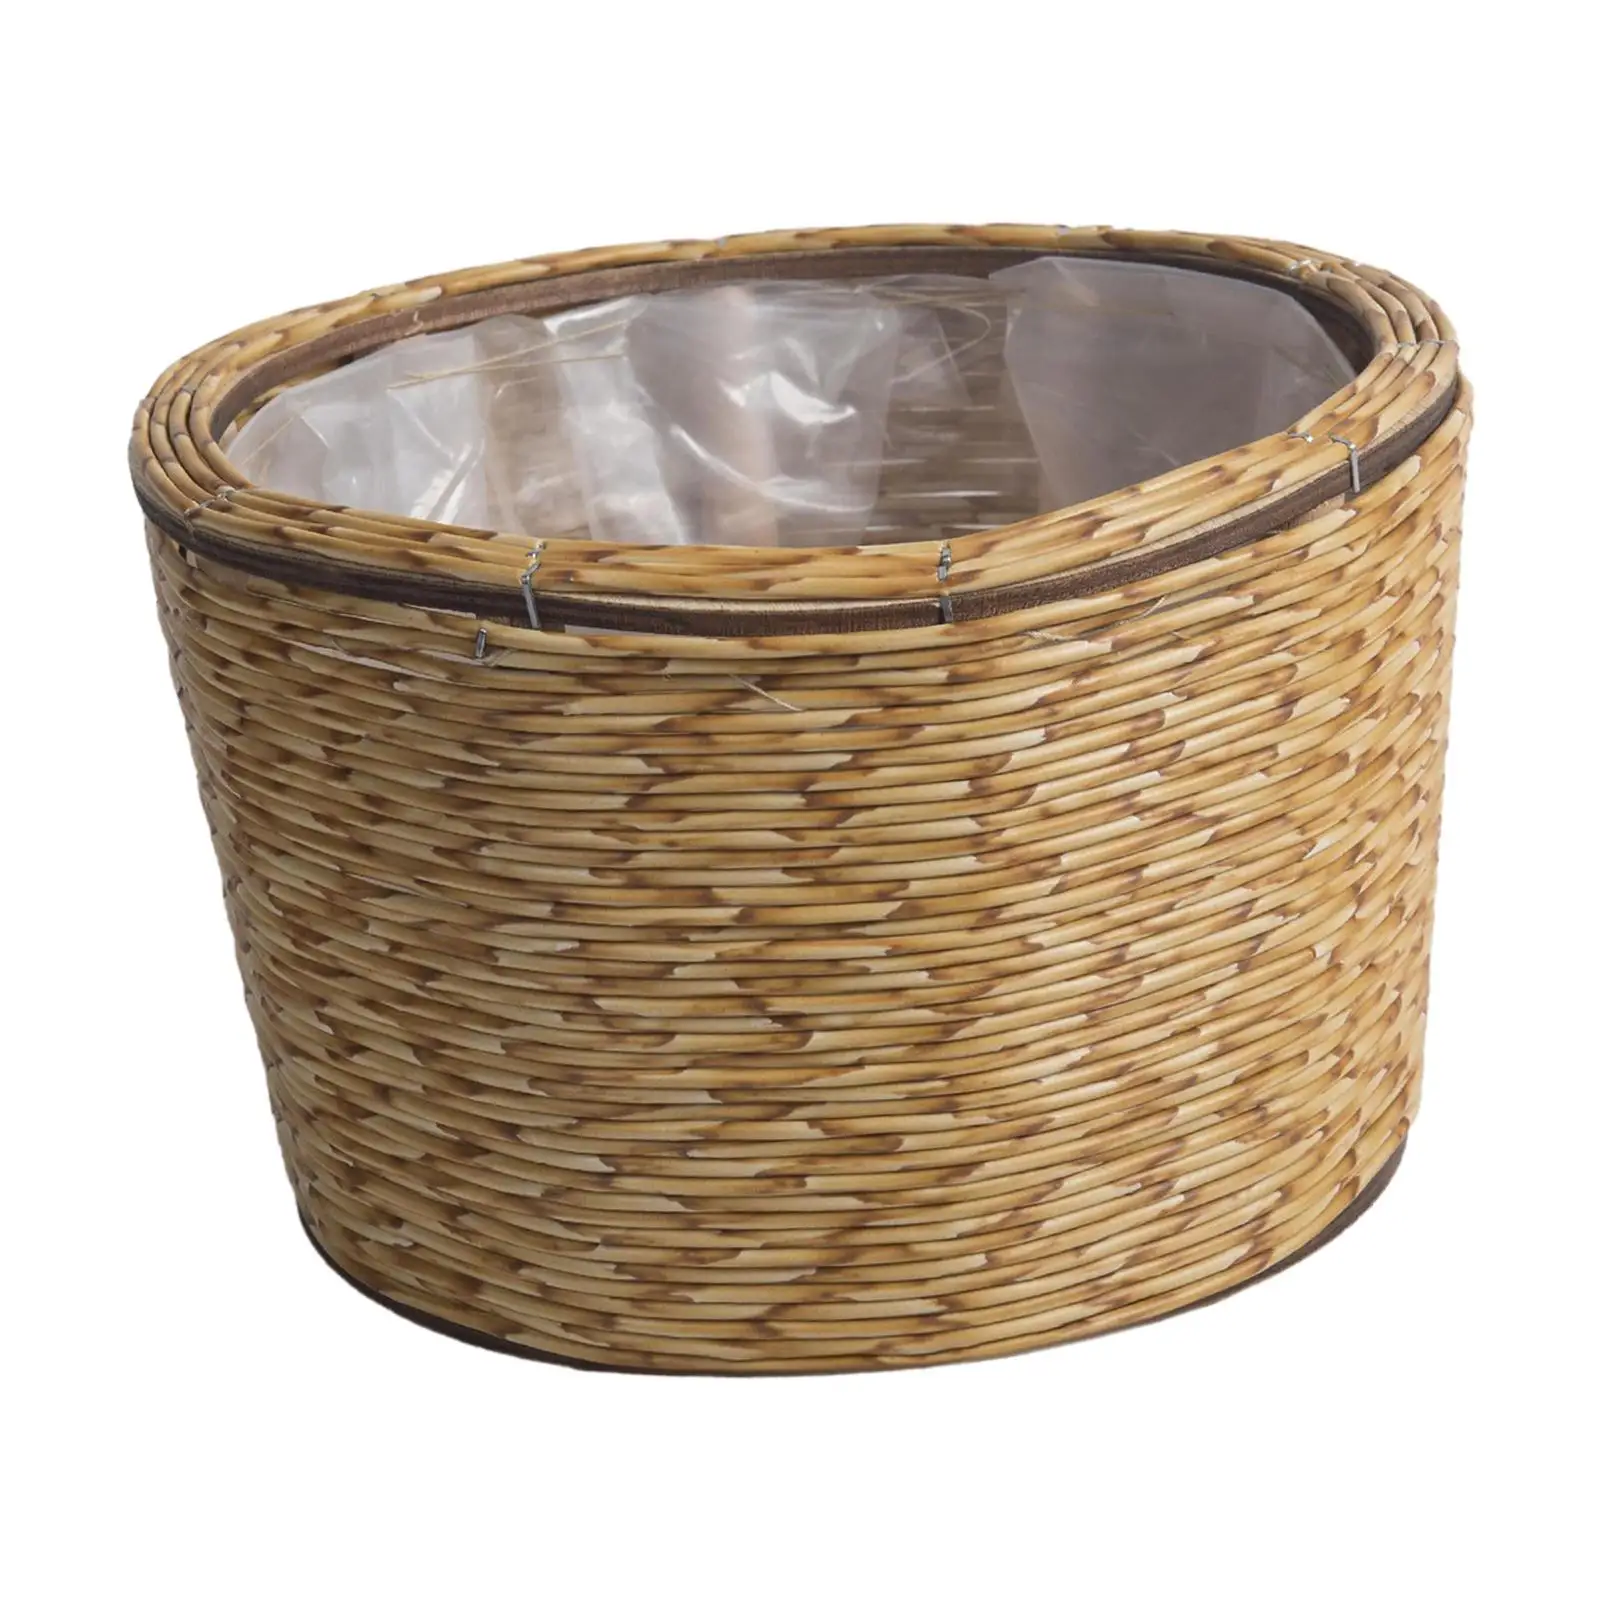 Woven Planters Basket with Plastic Liner Laundry Bag Containers Flowerpot Plant Pot for Indoor Picnic Balcony Bedroom Decoration